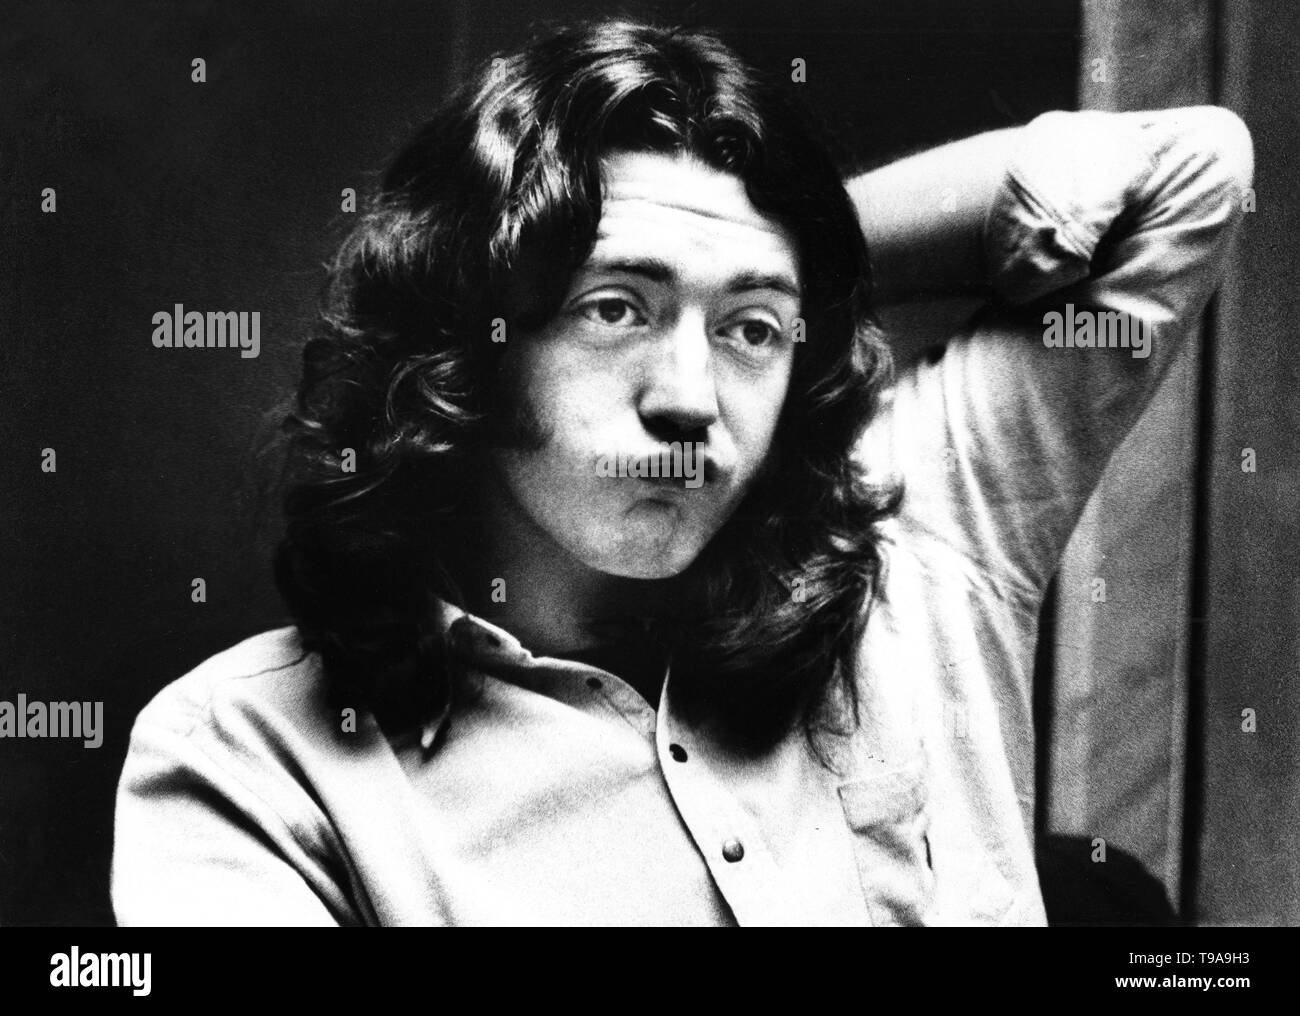 Rory Gallagher, Amsterdam, Netherlands - 1975,  (Photo Gijsbert Hanekroot) *** Local Caption *** Rory Gallagher Stock Photo